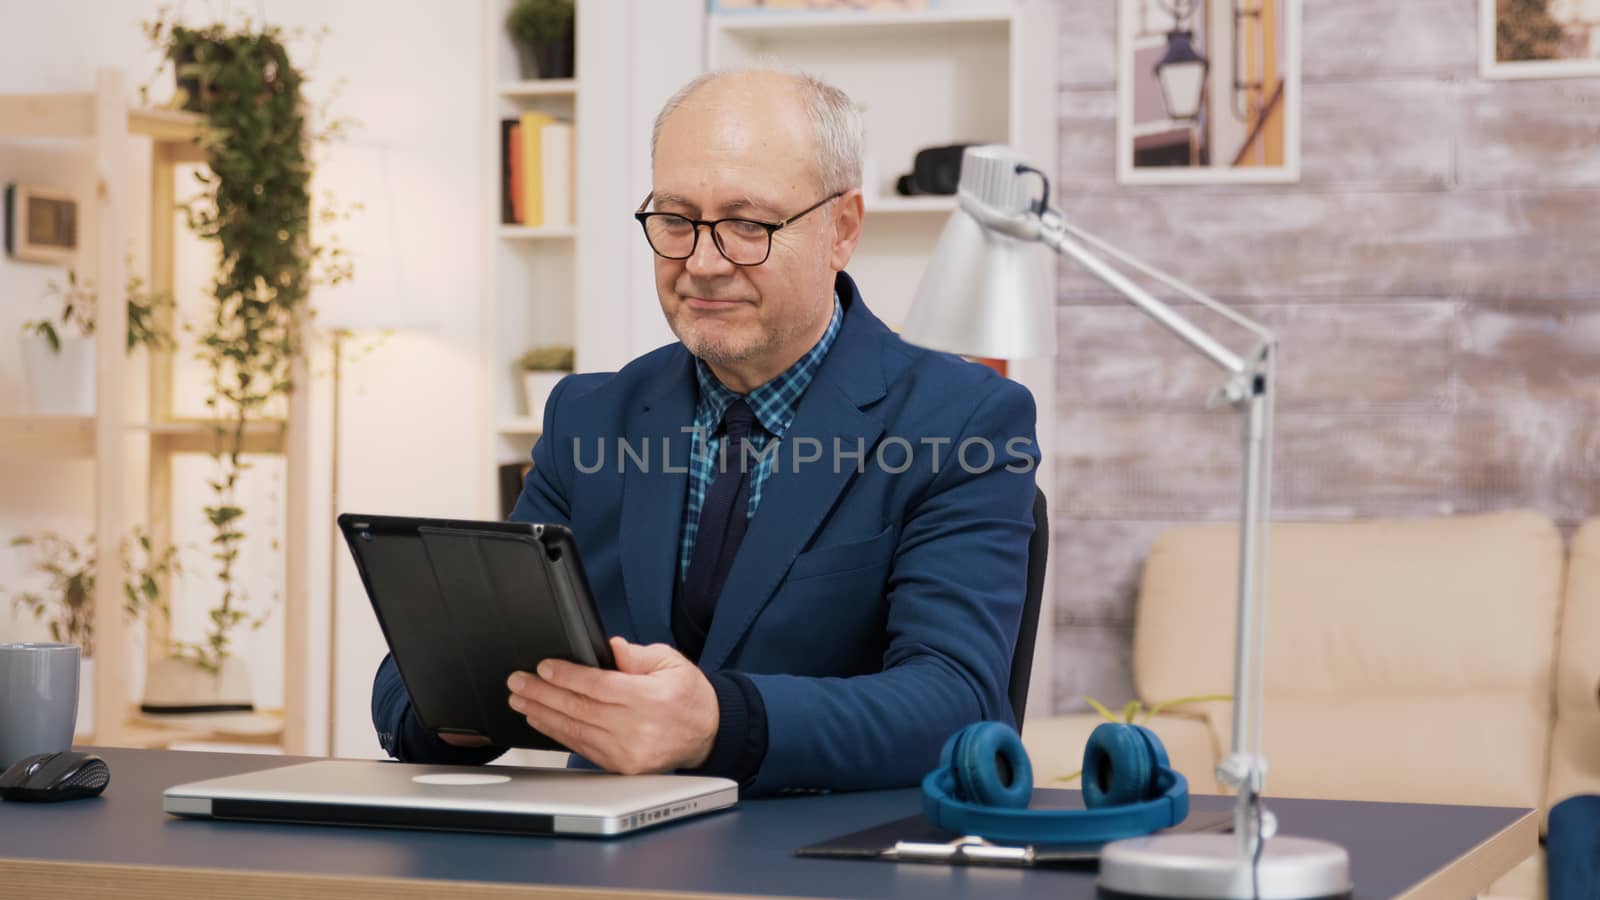 Elederly man using tablet while sitting down at the office in living room. Elderly woman walking in the background